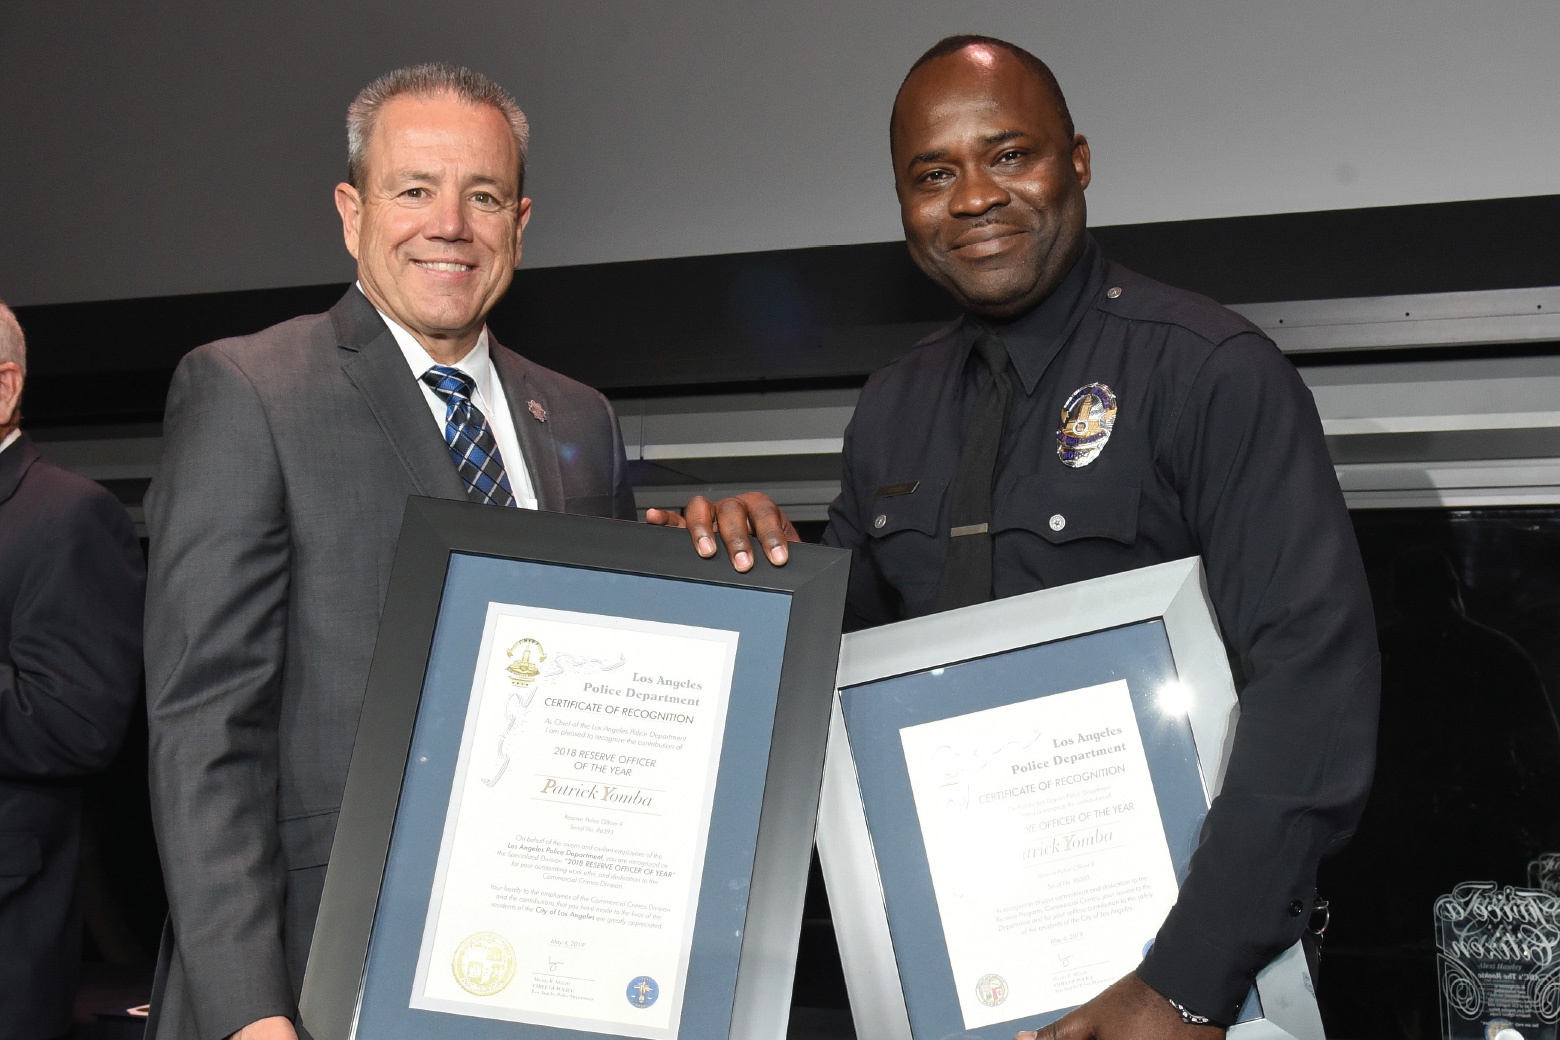 reserve-officers-of-the-year-honored-lapds-150th-anniversary-abcs-the-rookie-twice-a-citizens-4